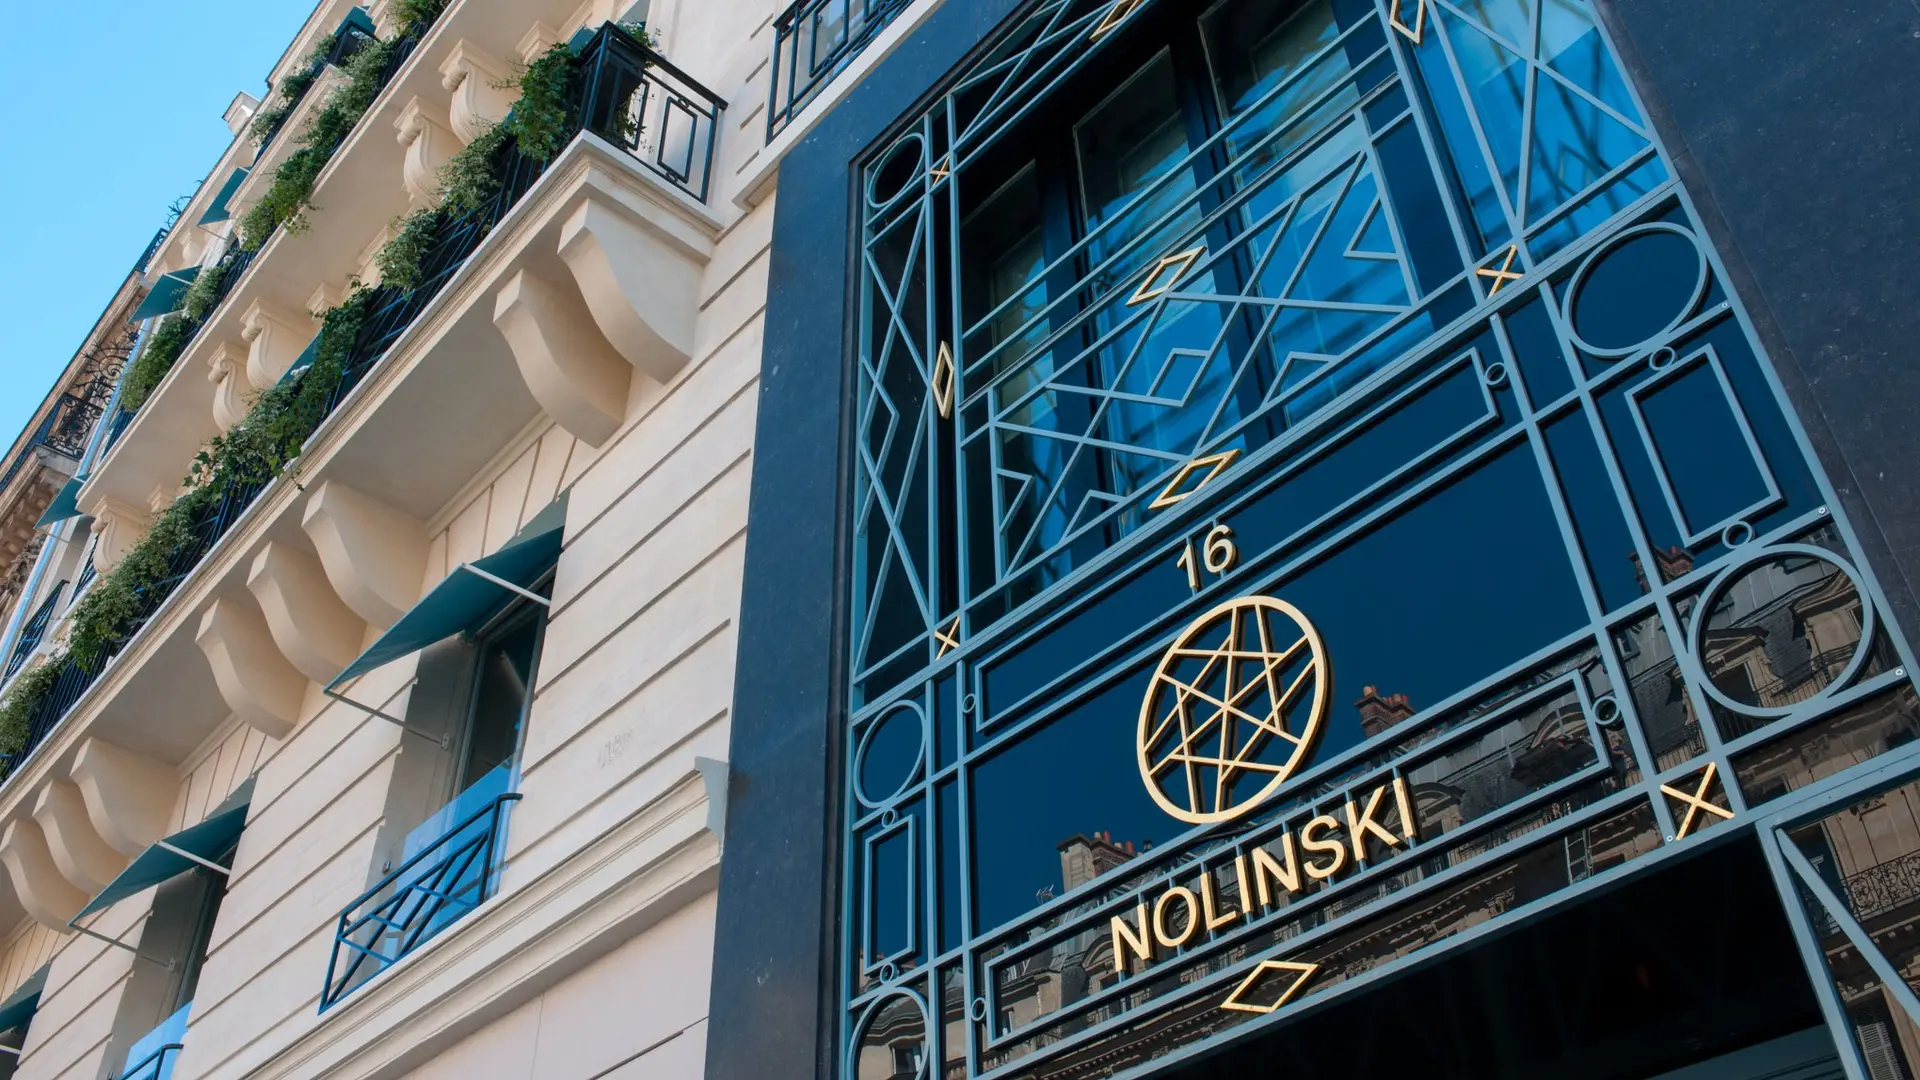 Main entrance of Nolinski hotel paris with the logo in gold.